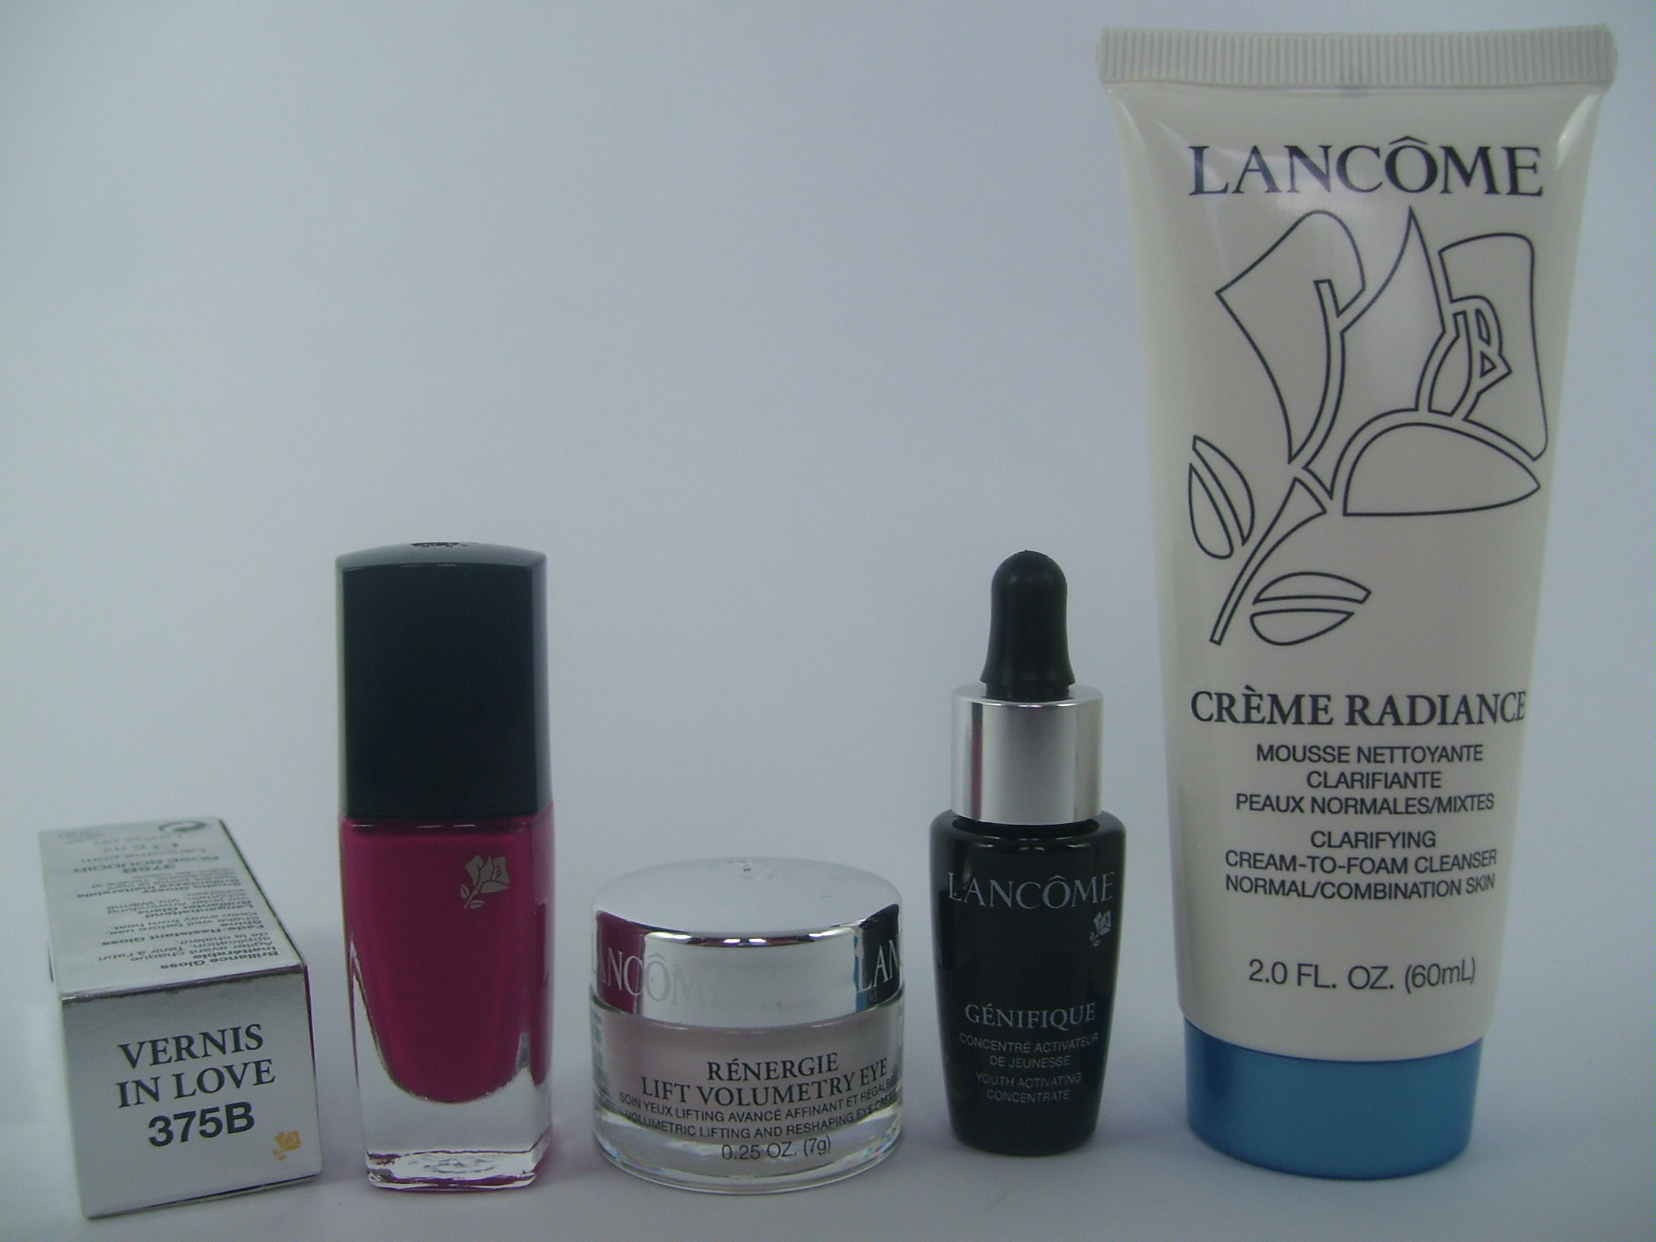 Show & Tell:  Lancome Order with Vernis in Love Nail Lacquer